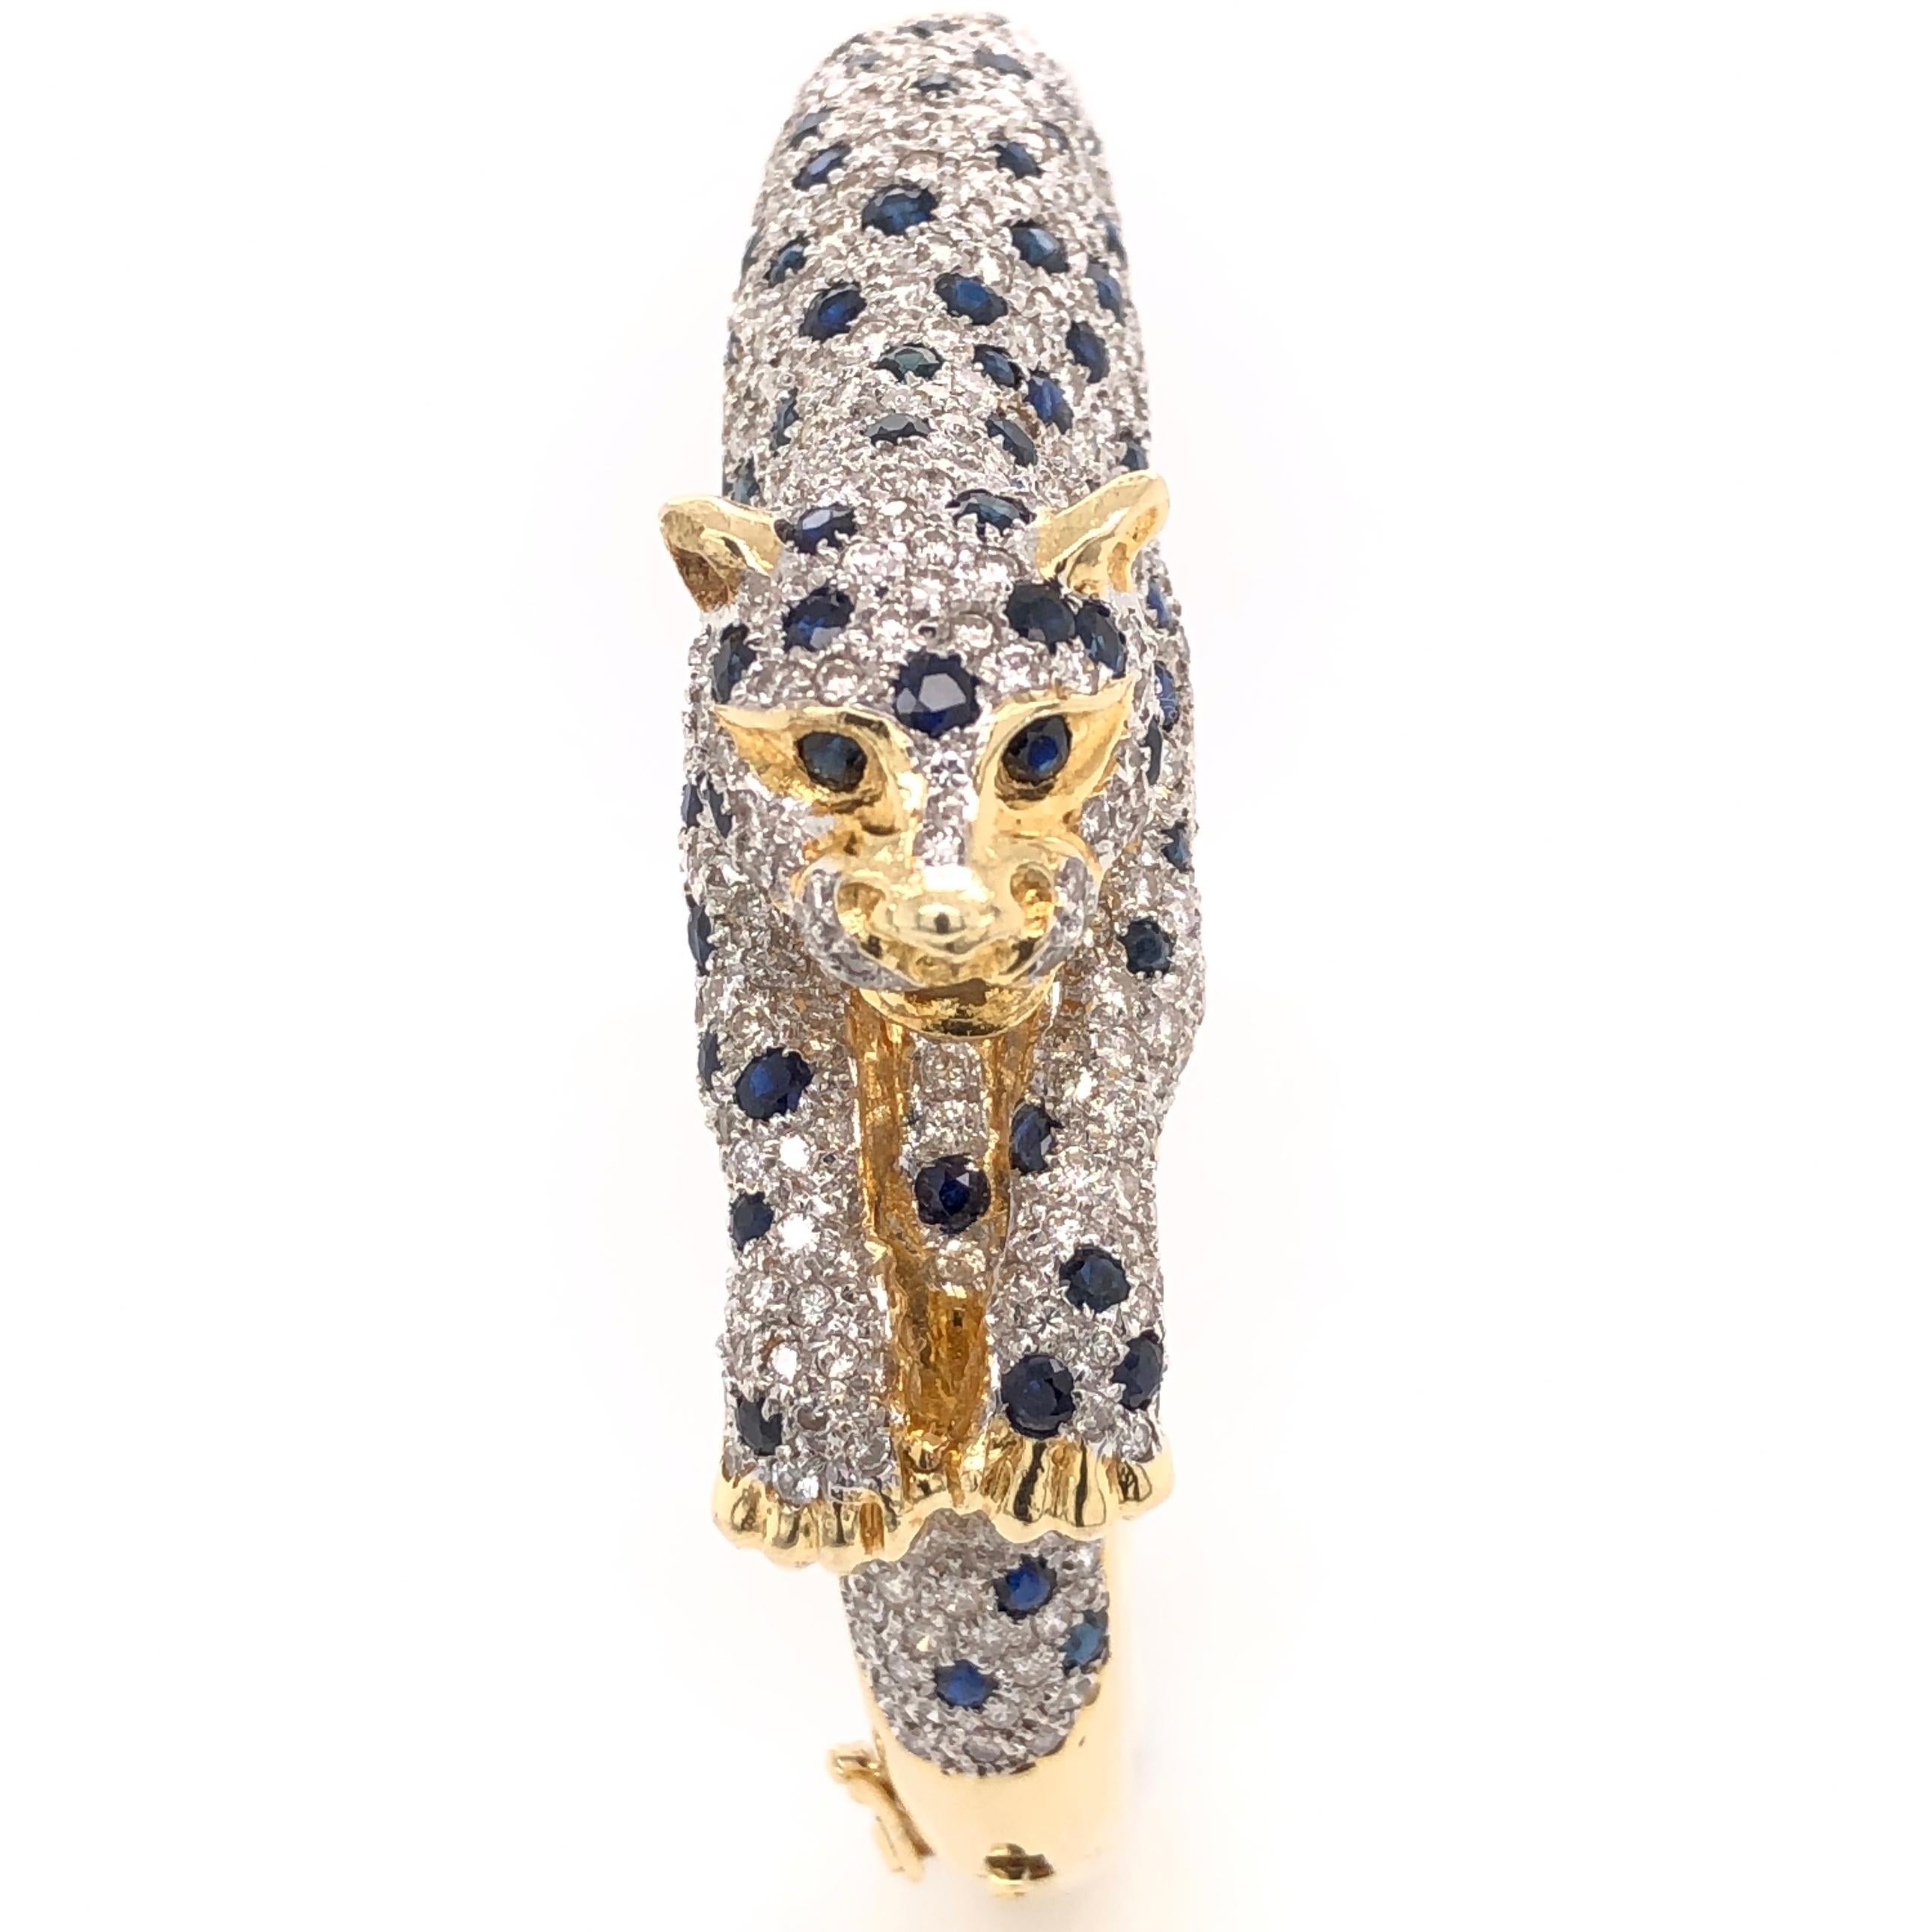 Stylish and Sinuous Diamond and Sapphire Panther Bangle Bracelet intricately designed and Hand crafted in 18K yellow gold with incredible detail and elegant design, using fine Gem stones and superior craftsmanship. Comprising: approx. 6.50 Carat